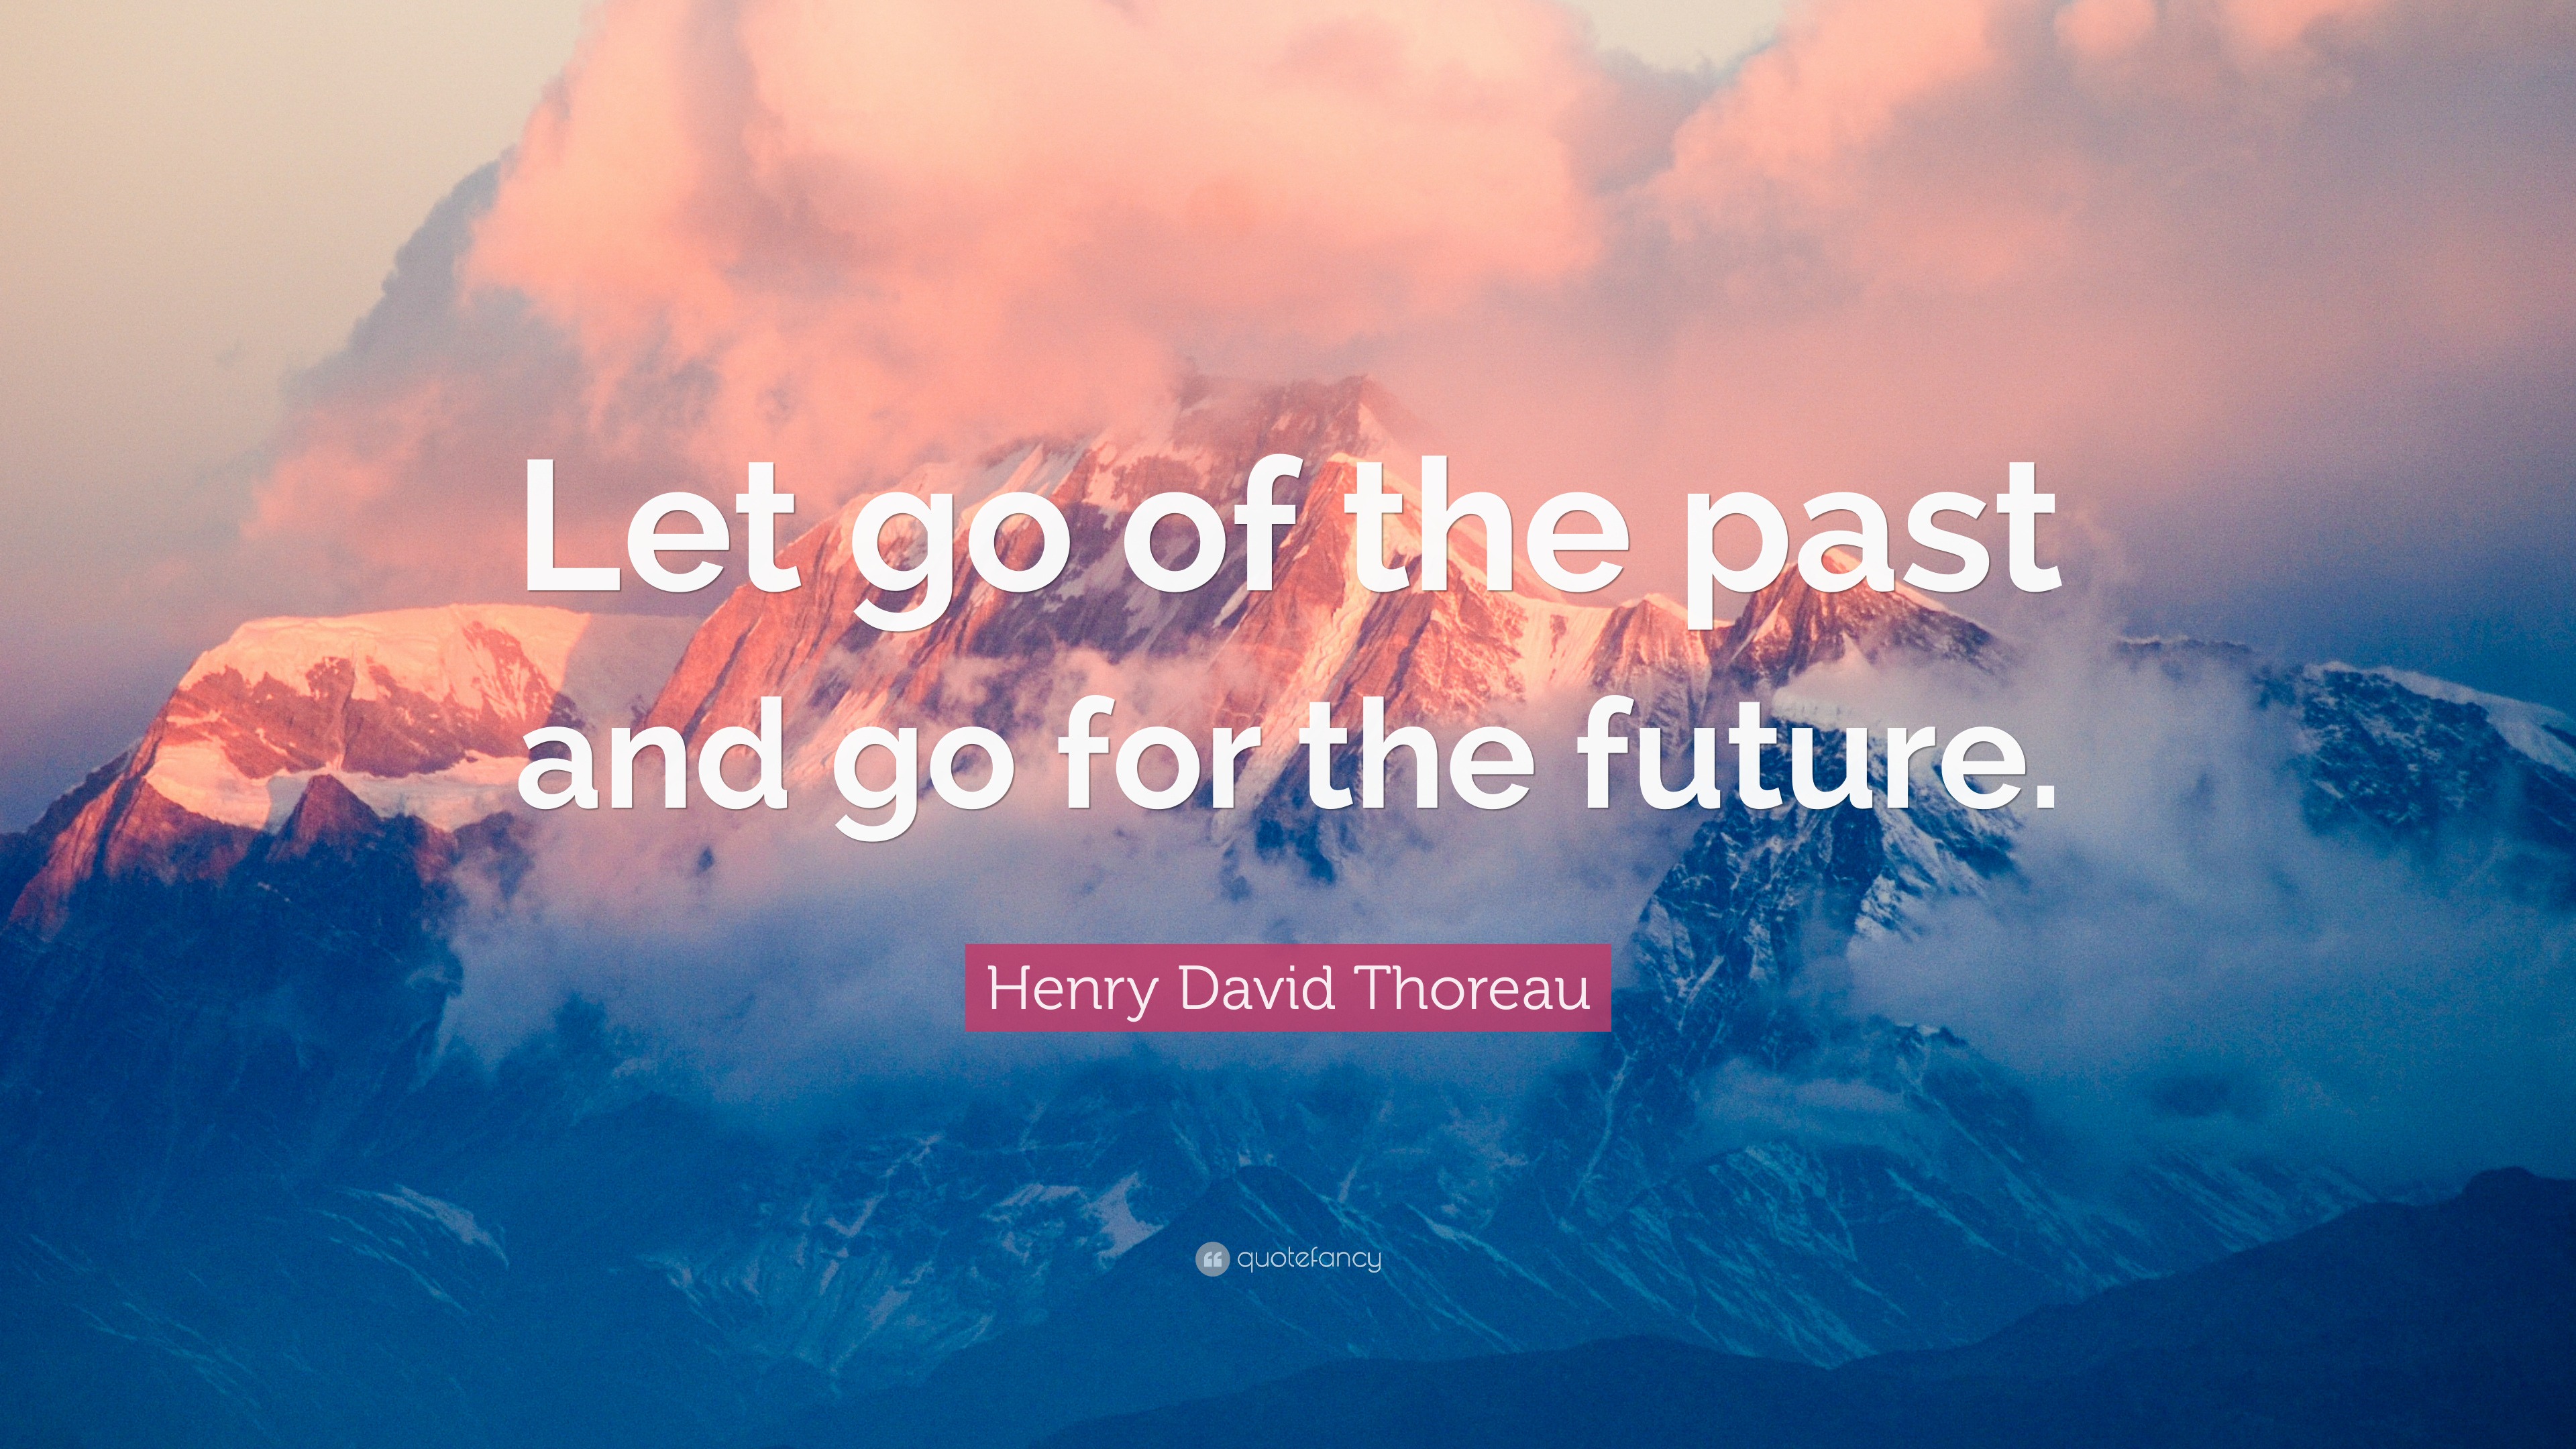 Henry David Thoreau Quote: “Let go of the past and go for the future.”